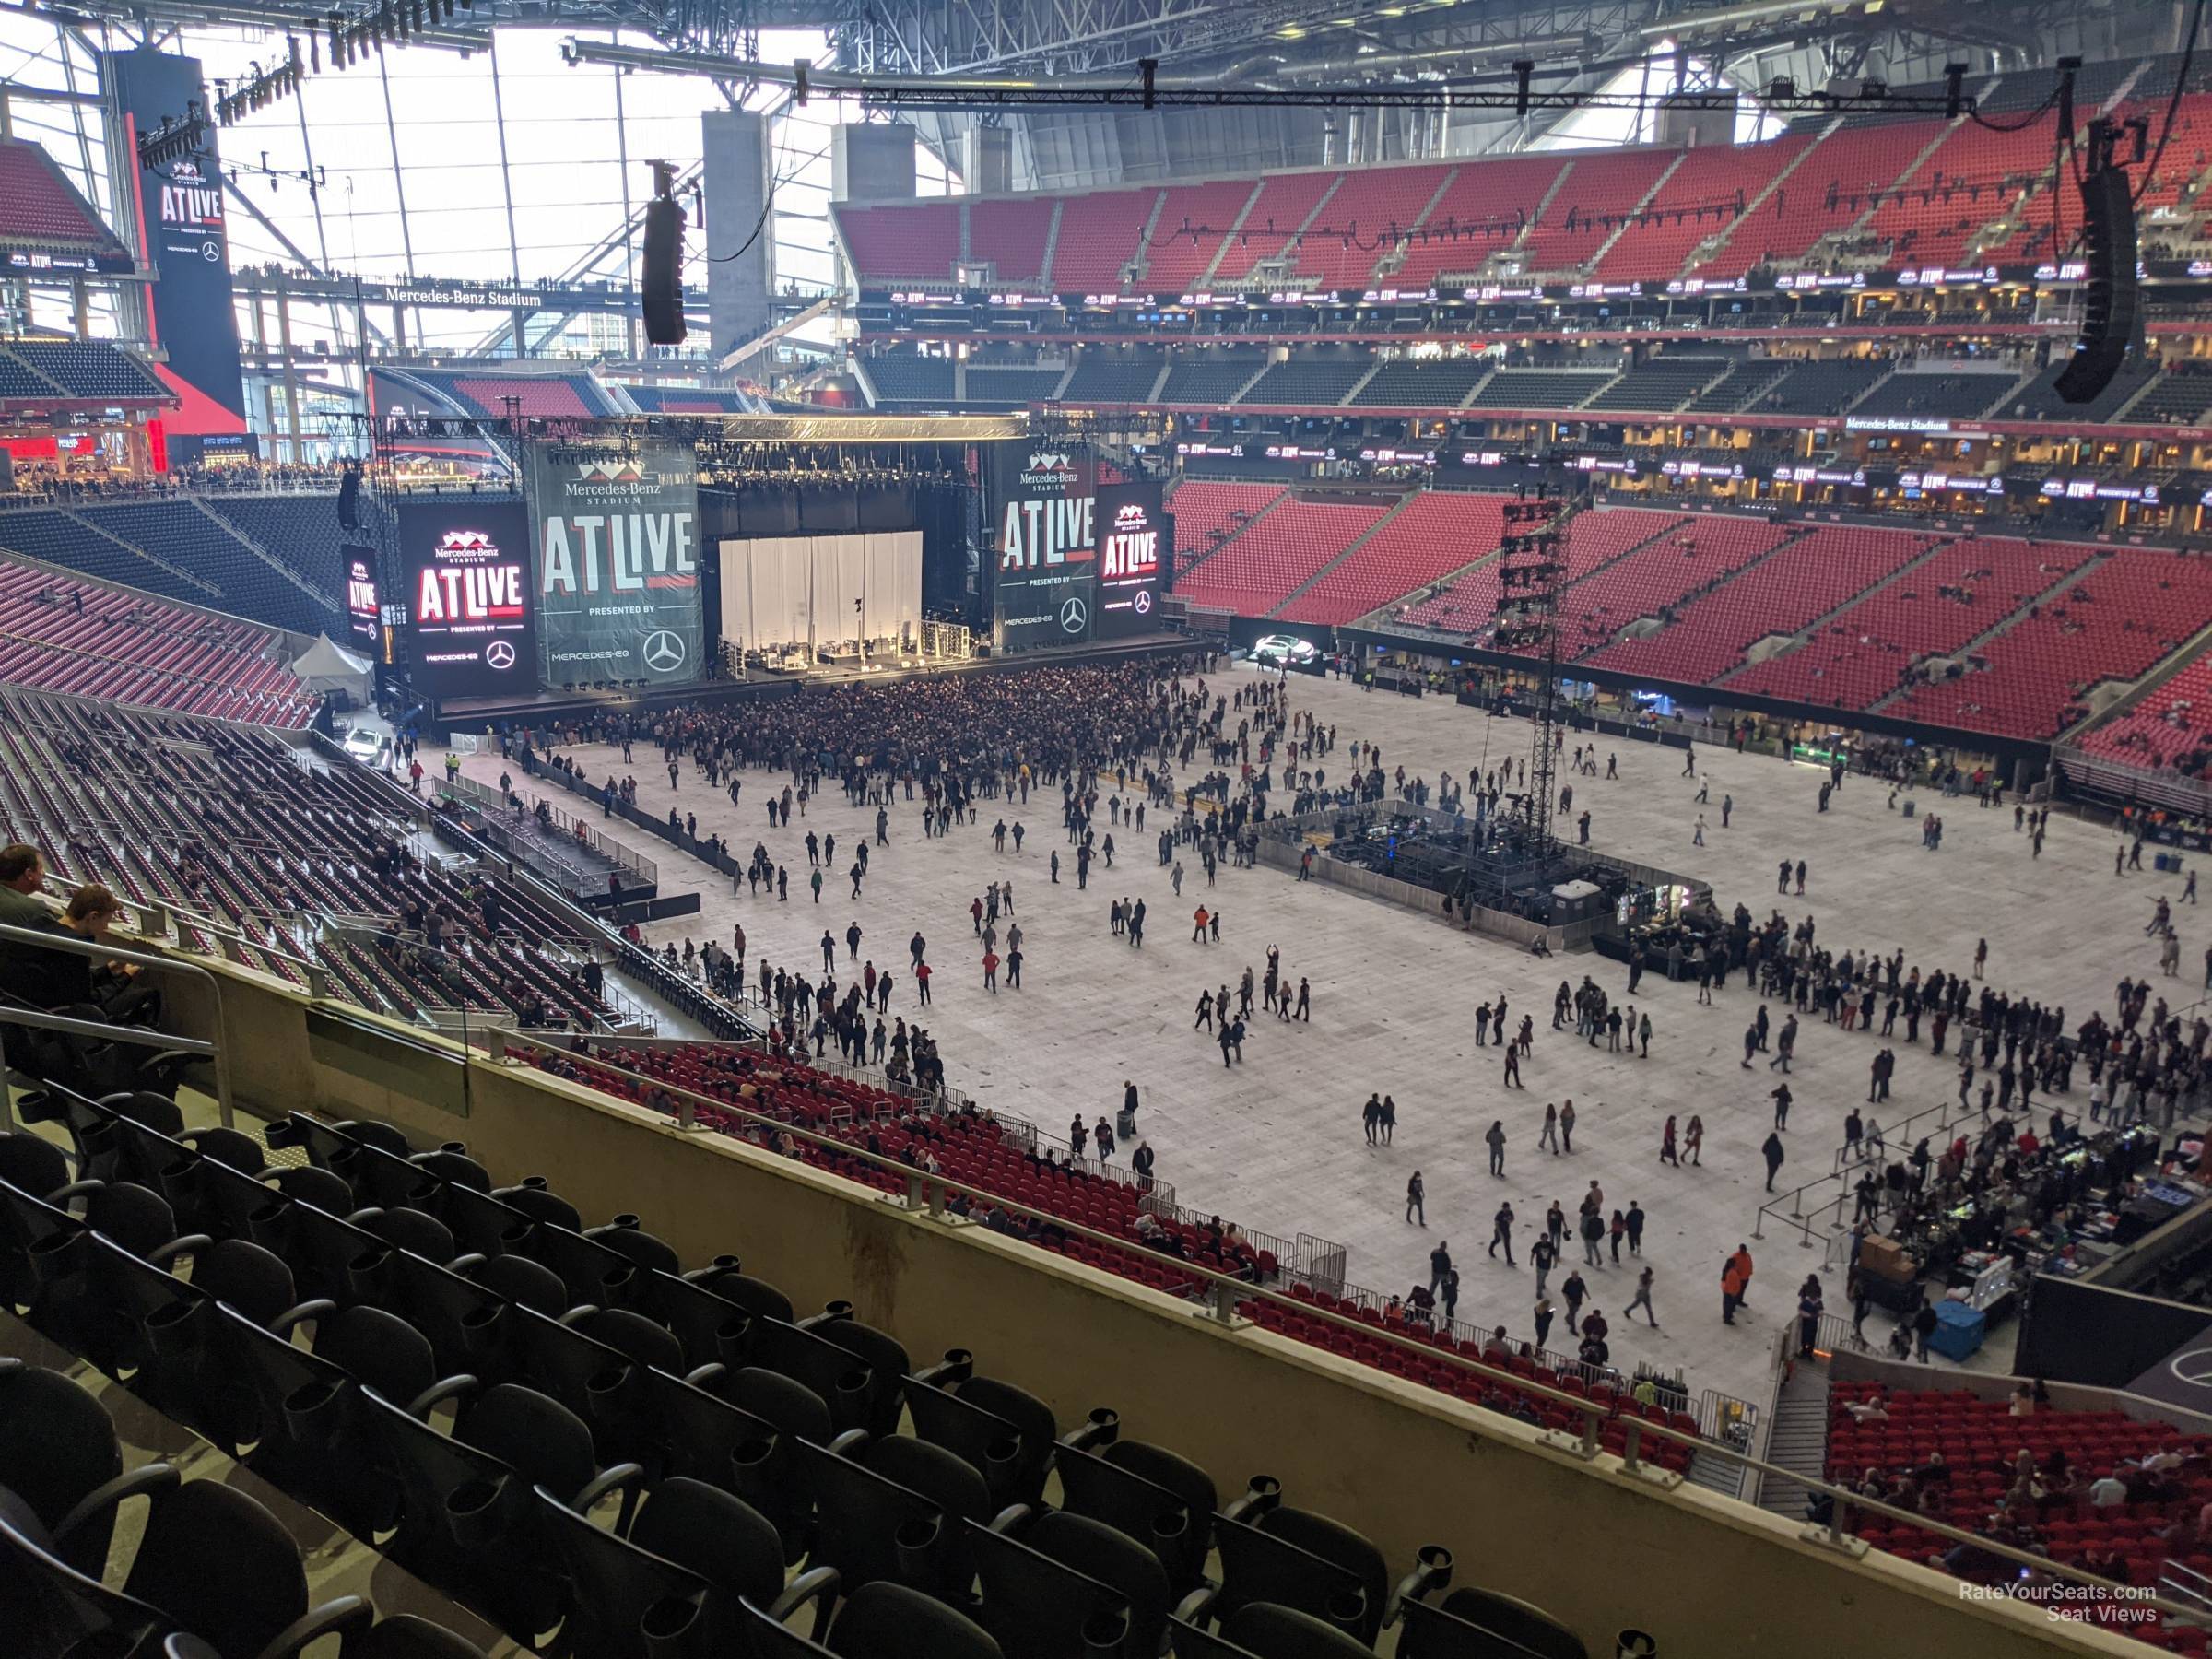 section 230, row 5 seat view  for concert - mercedes-benz stadium